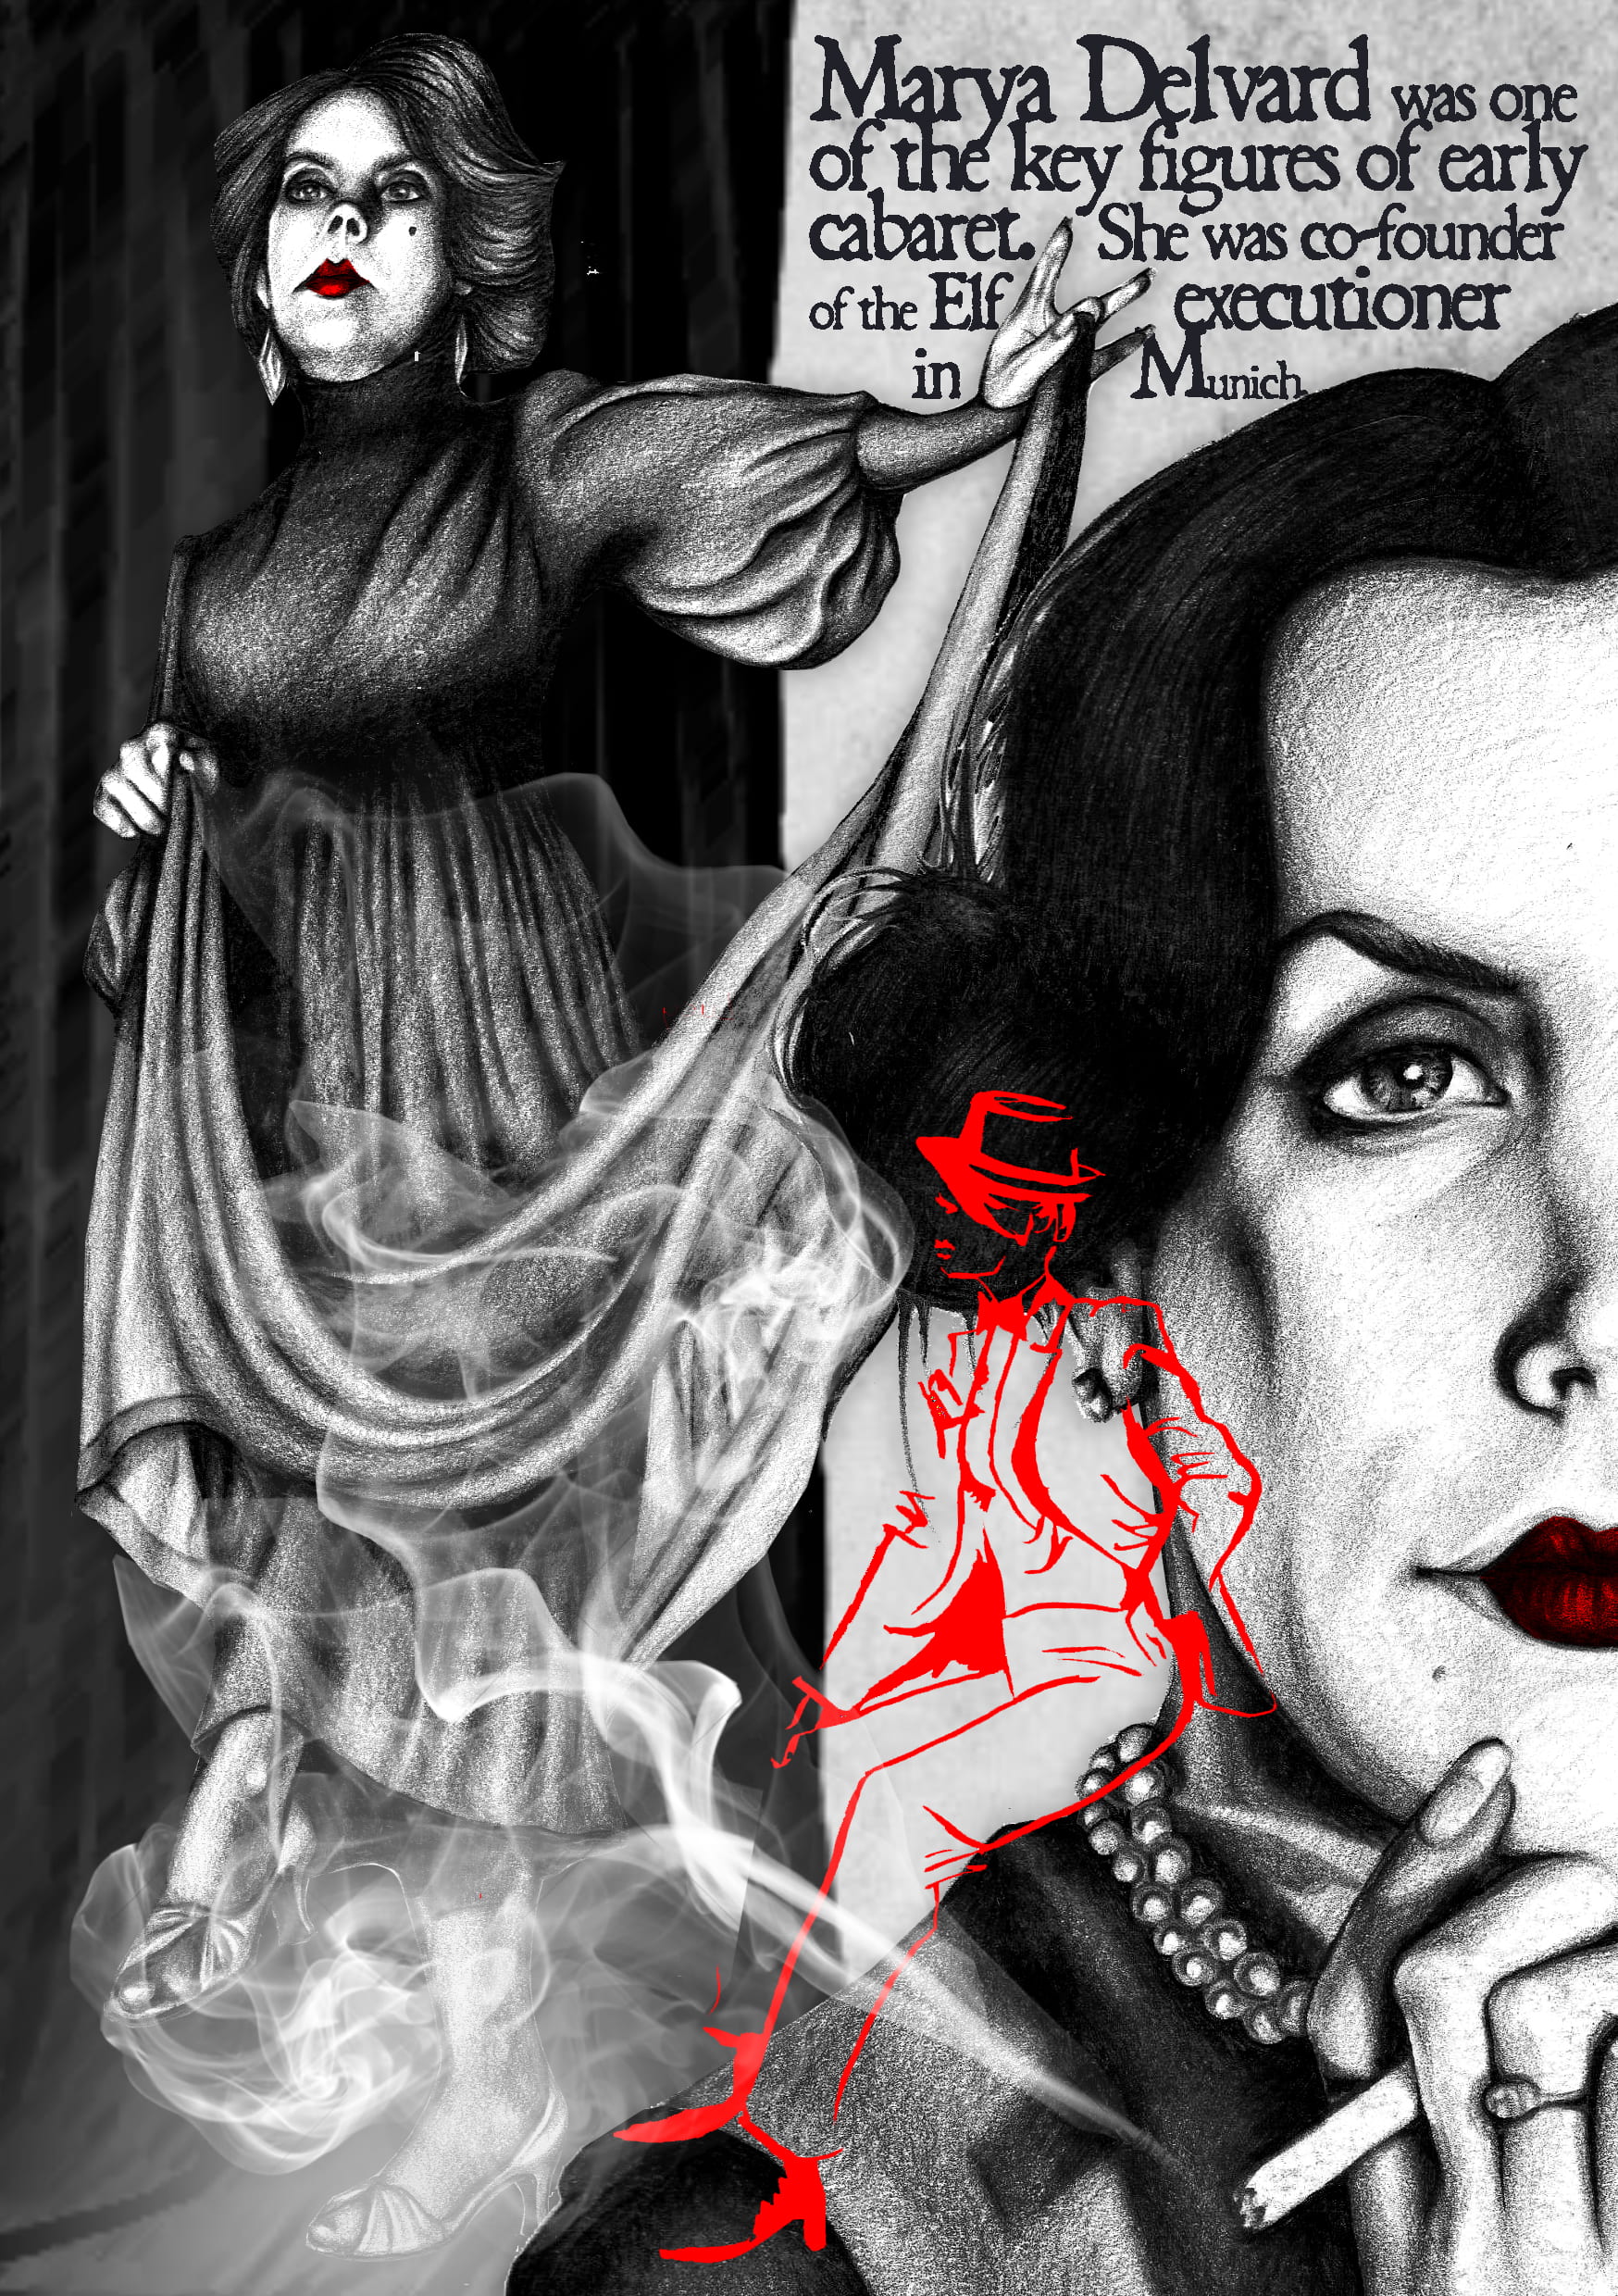 An illustration depicting cabaret star 'Marya Delvard', a close up of half of her face in the foreground, with a full body illustration by the side of it.